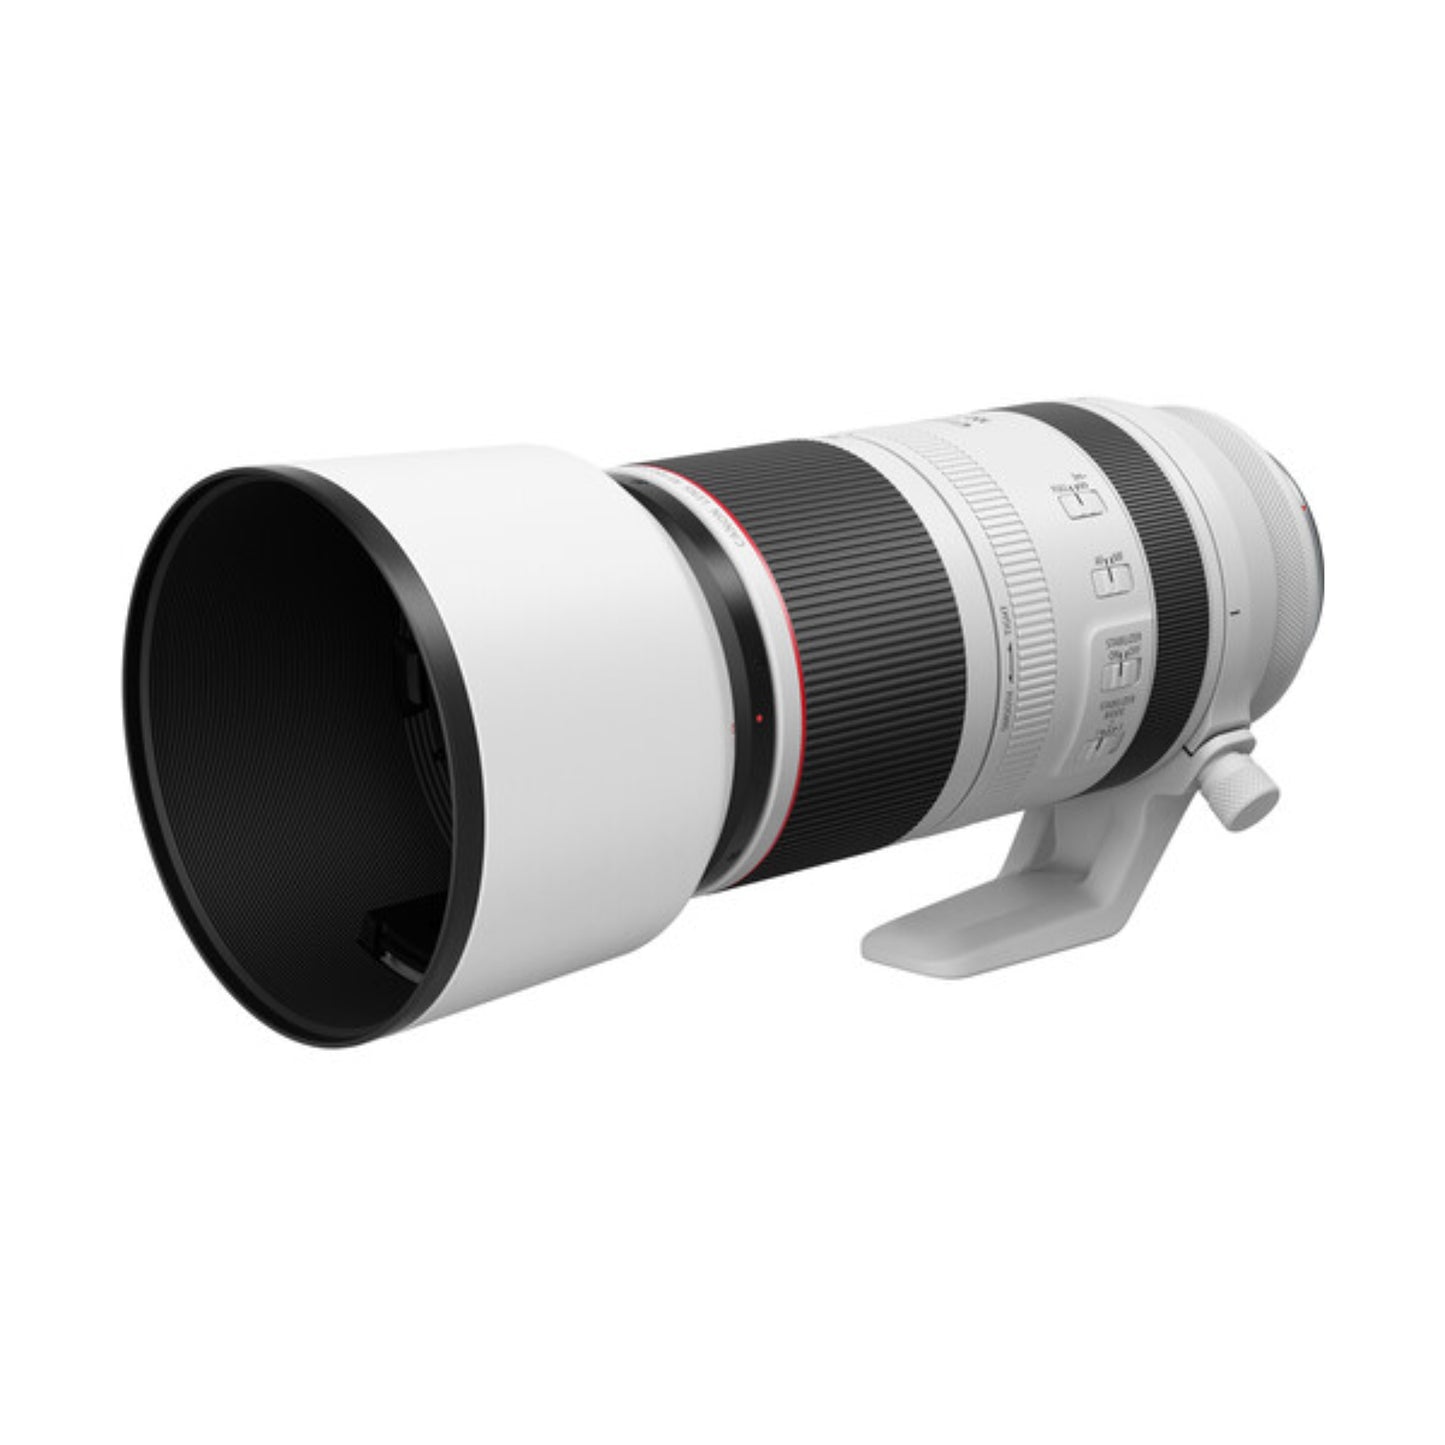 Canon RF 100 - 500mmn4.5 - 7.1 lens for hire